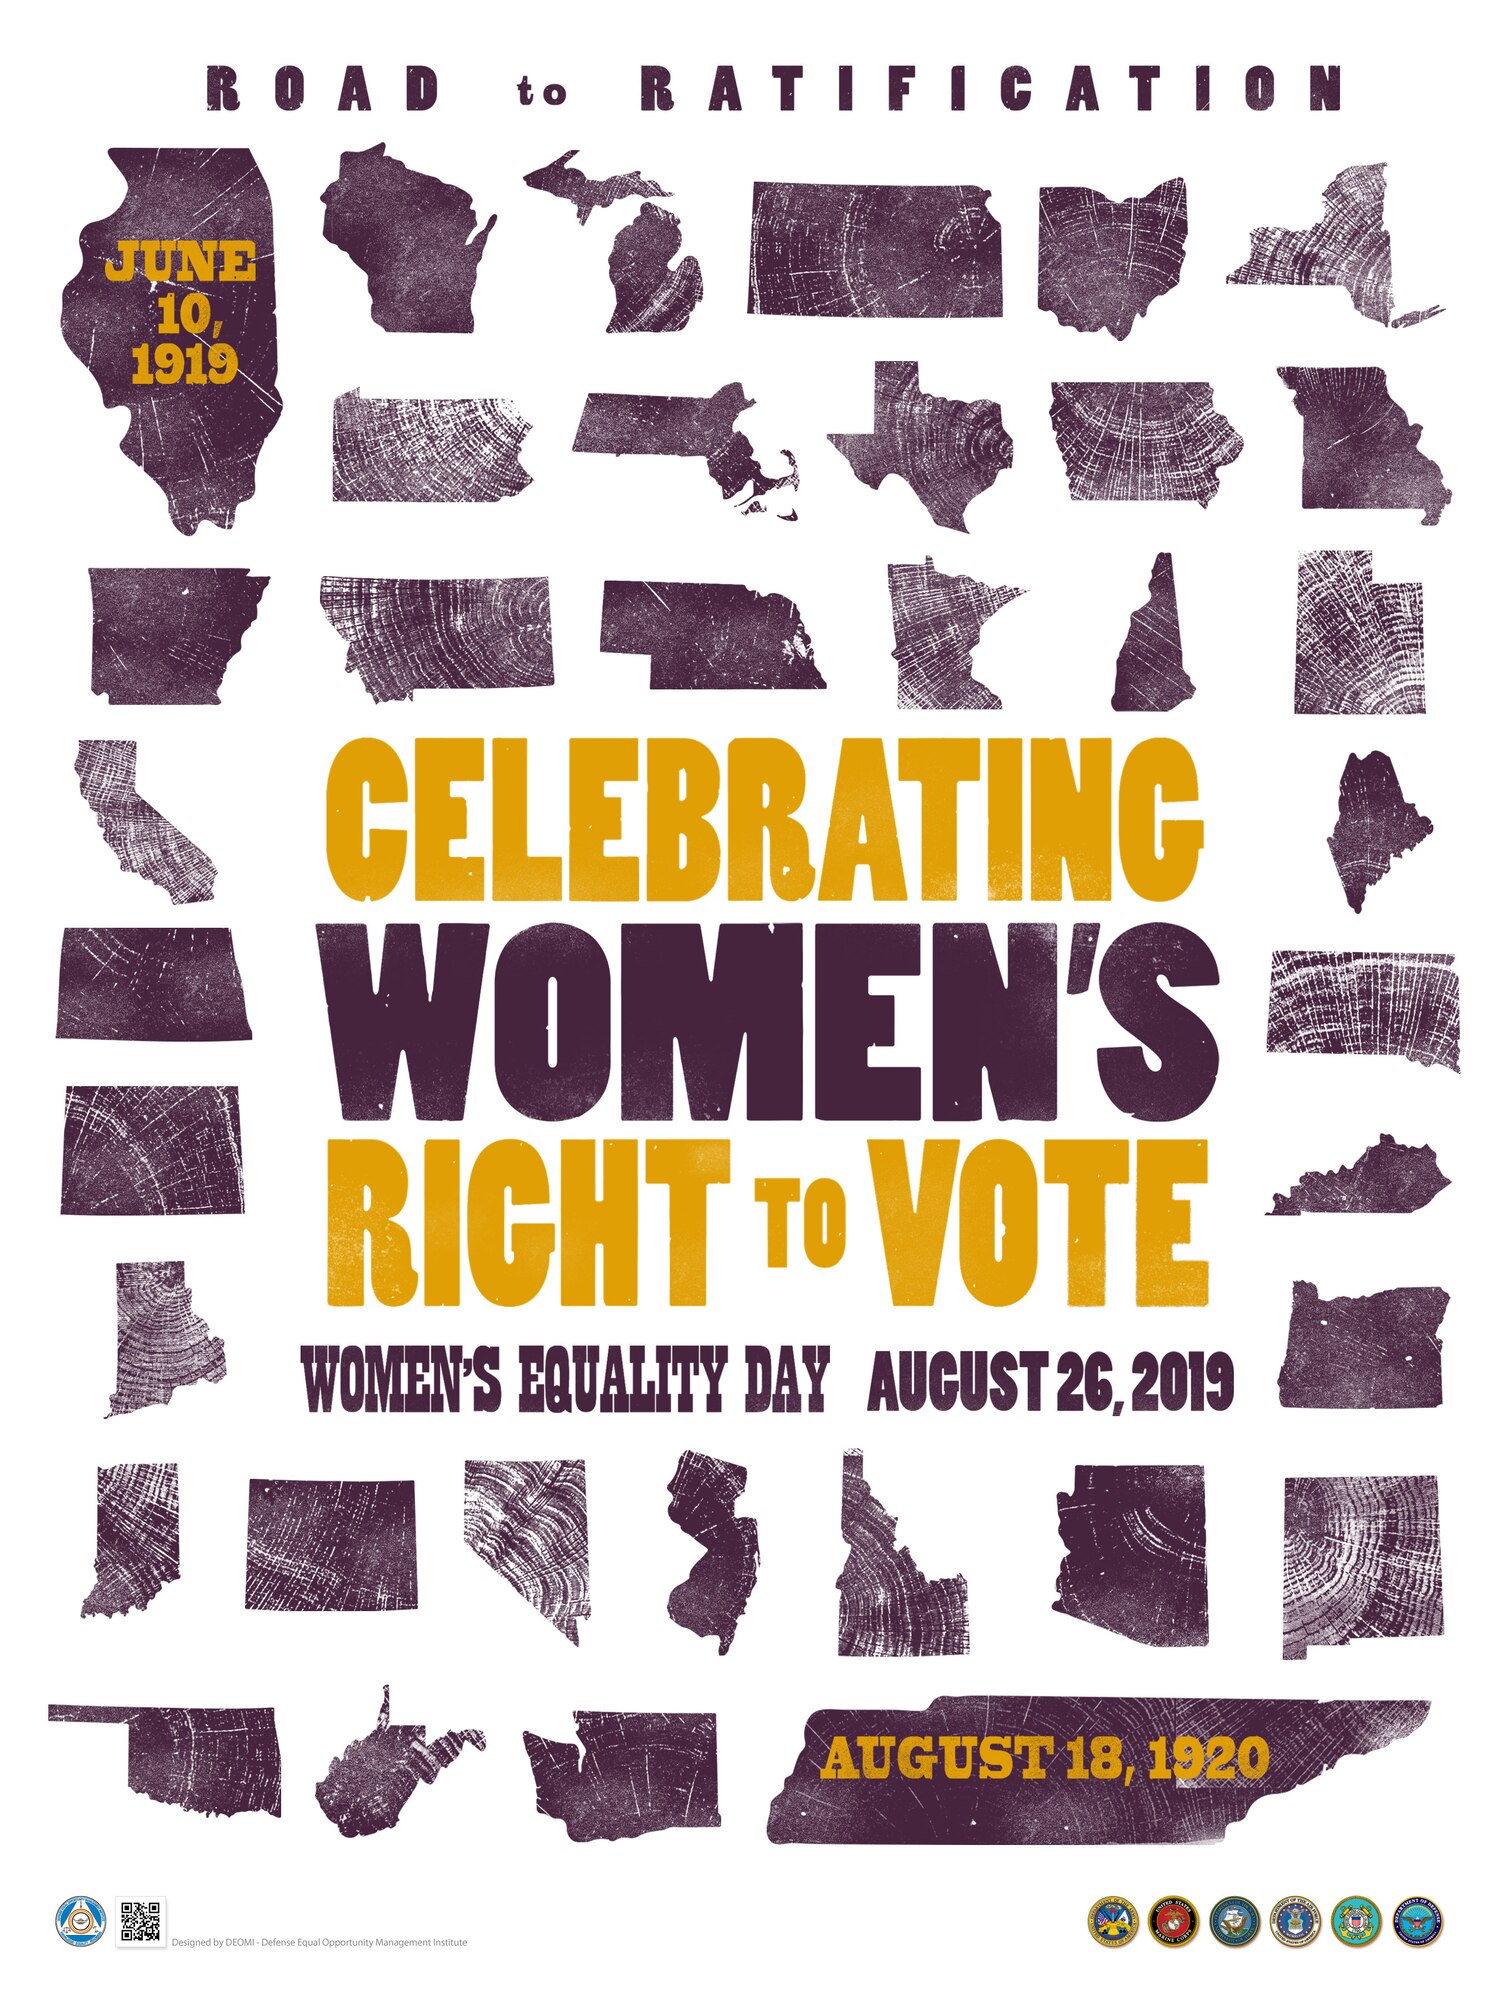 The observance recognizing Women's Equality Day was established by Joint Resolution of Congress in 1971. Women's Equality Day is observed on the 26th day of August and commemorates the 1920 passage of the 19th Amendment to the Constitution, which gave women the right to vote. The observance has grown to include focusing attention on women's continued efforts toward gaining full equality. (Source: www.deomi.org)